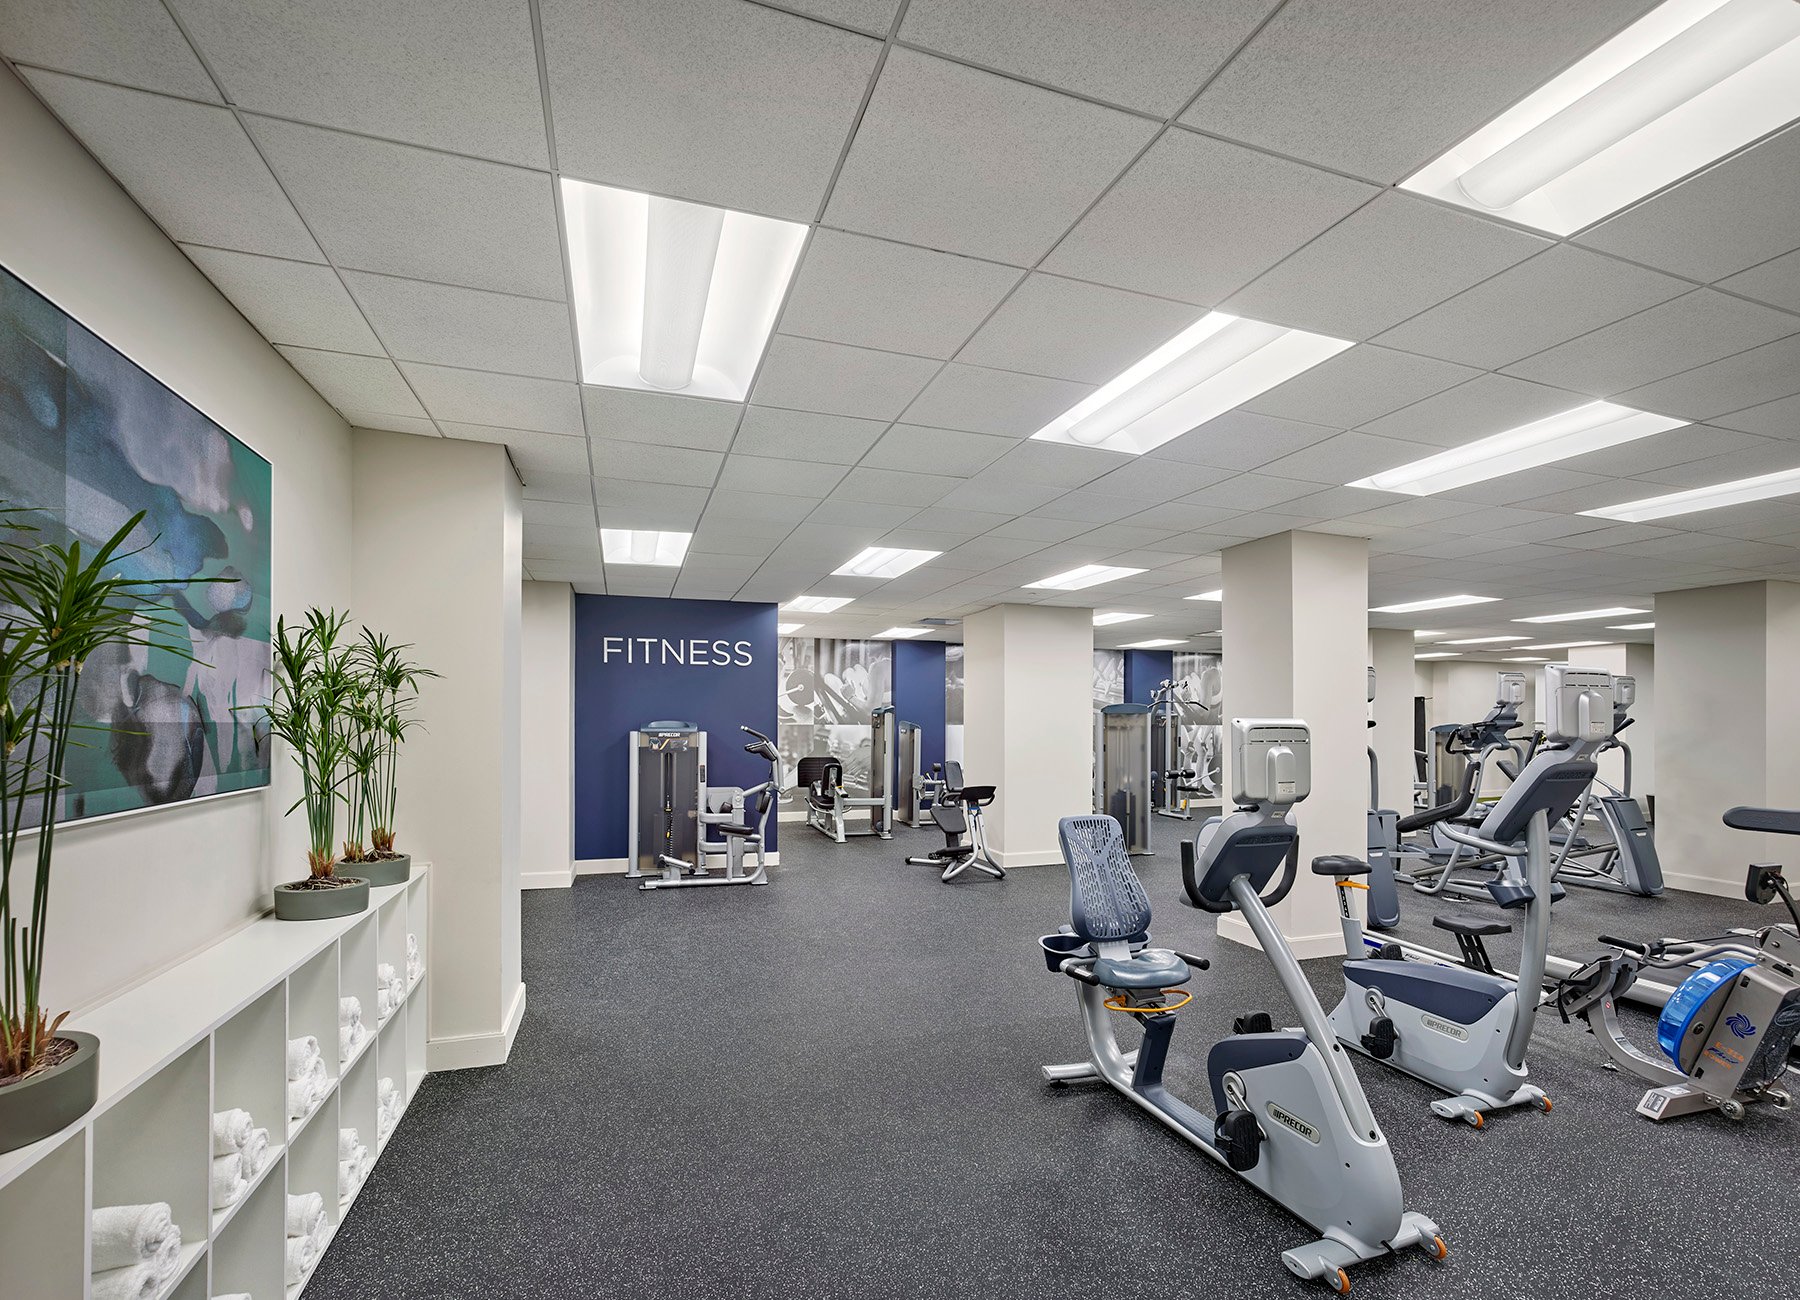 Modern fitness facility with cardio machines, free weights, and blue accent wall in the background